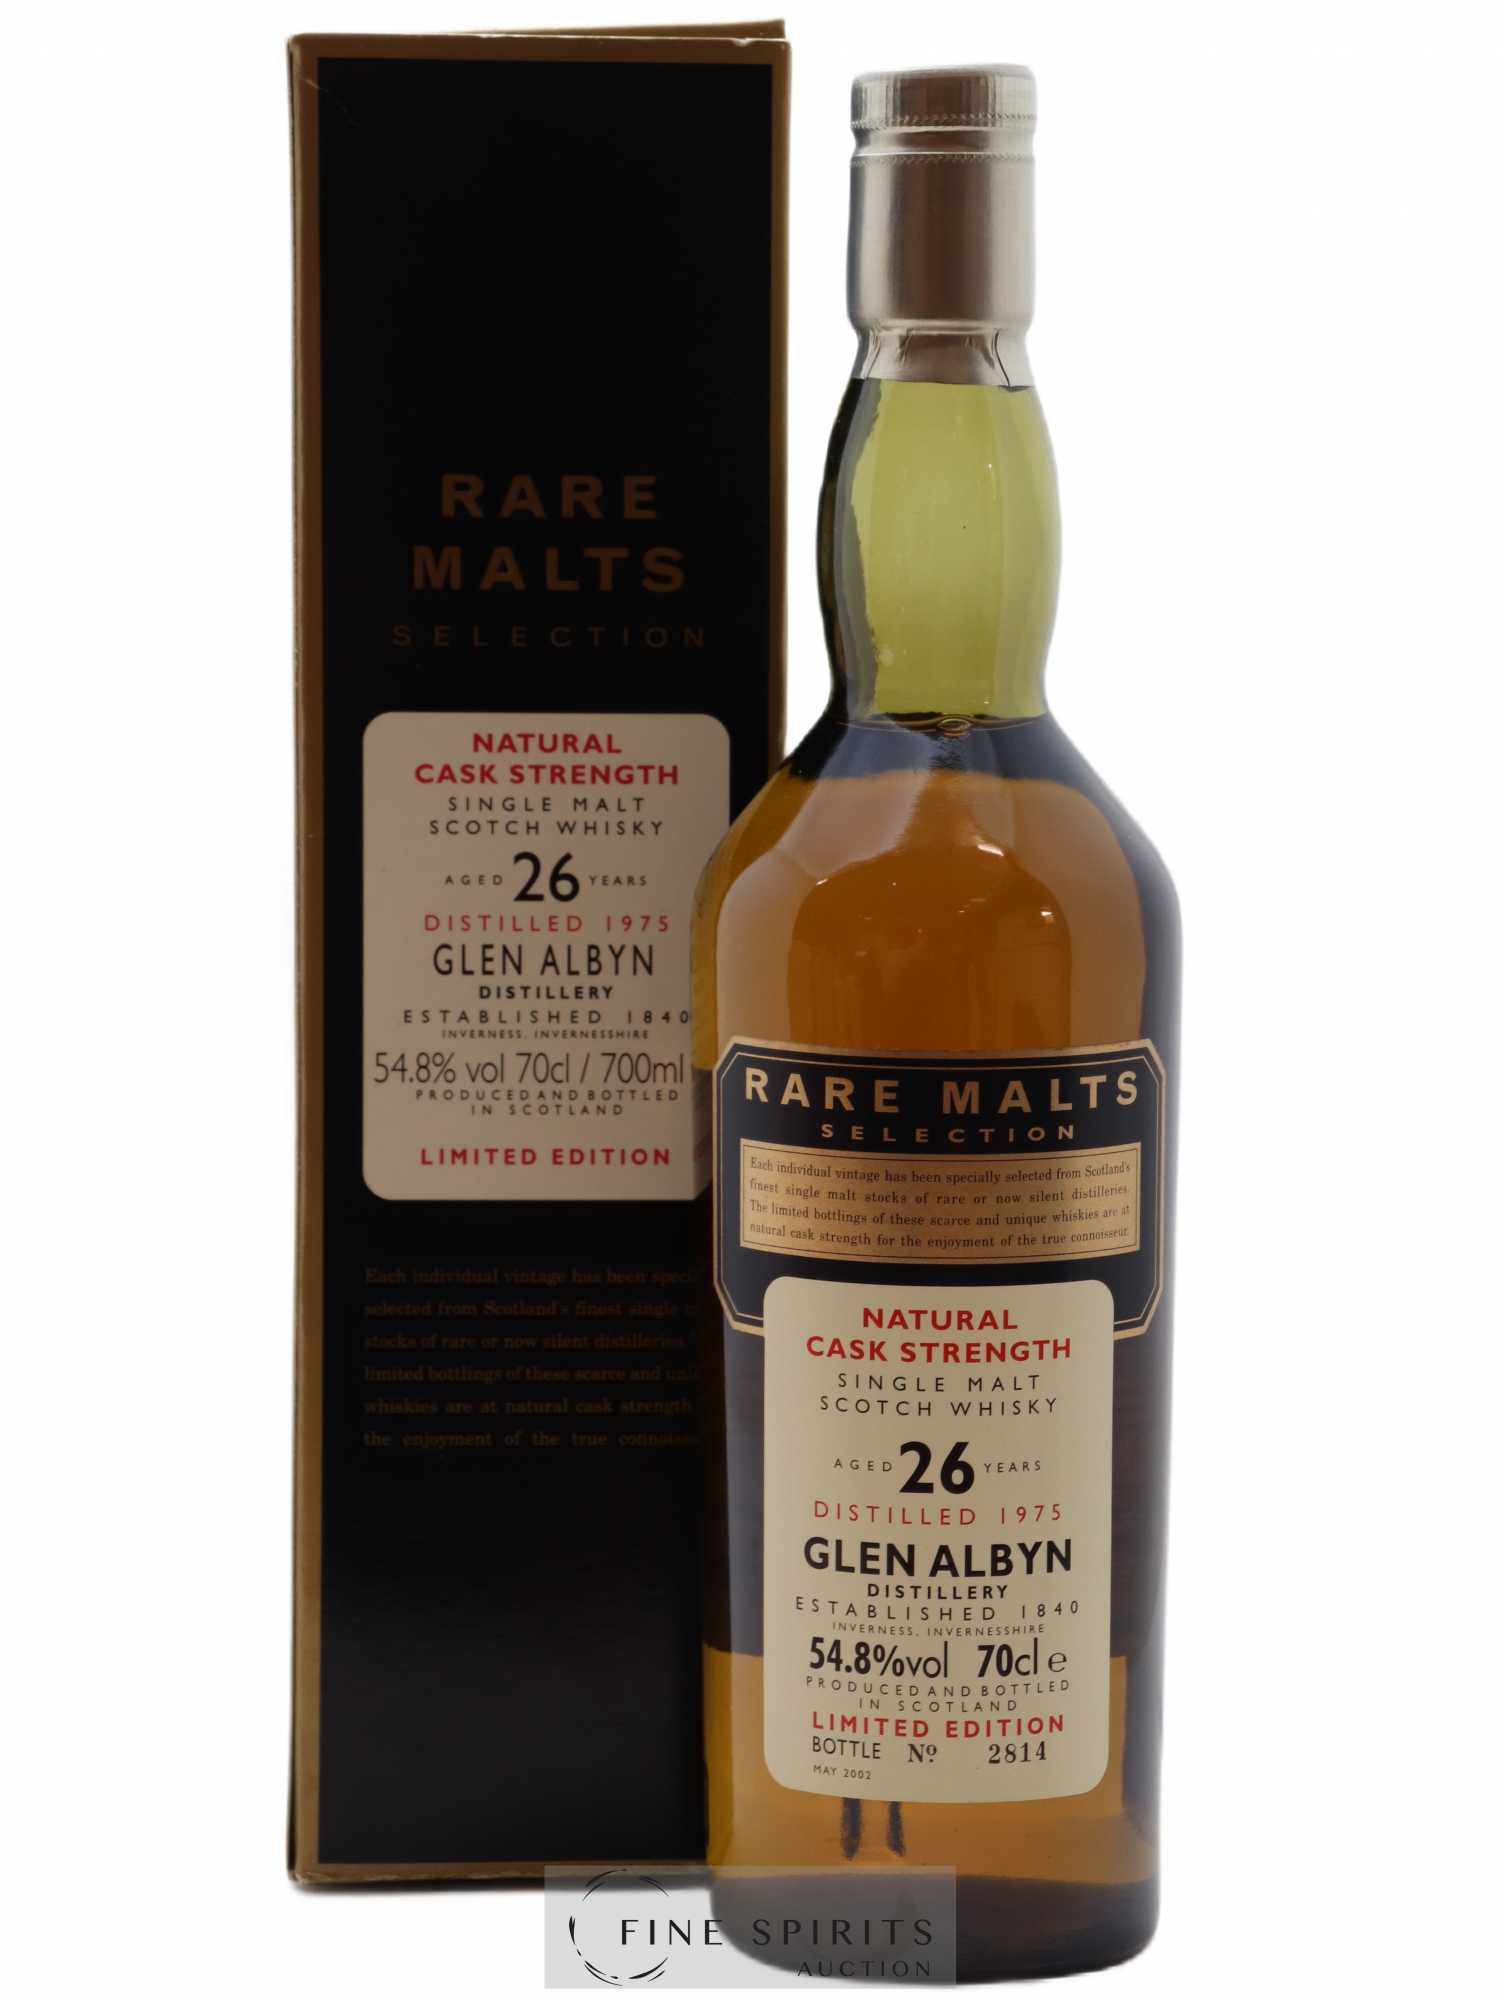 Glen Albyn 26 years 1975 Of. Rare Malts Selection Natural Cask Strengh - bottled 2002 Limited Edition 